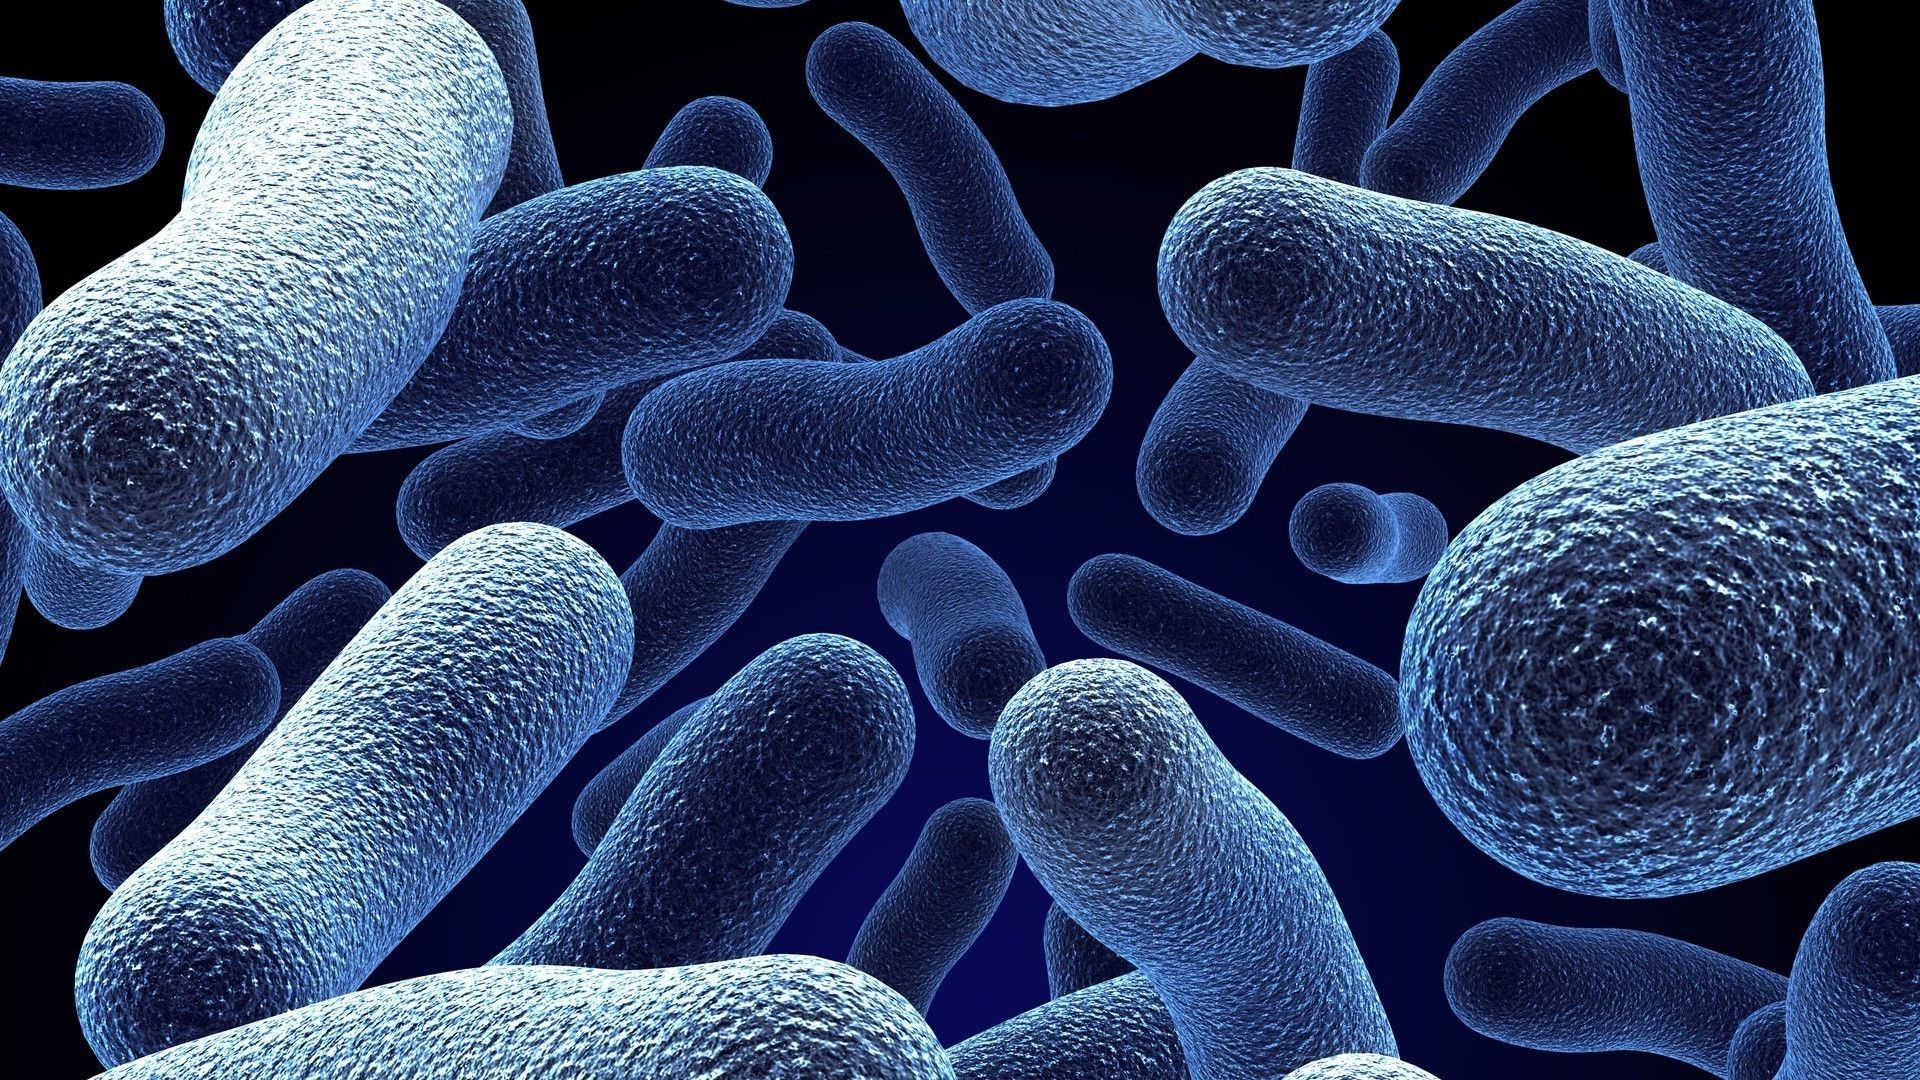 Microbes Wallpaper Free Microbes Background